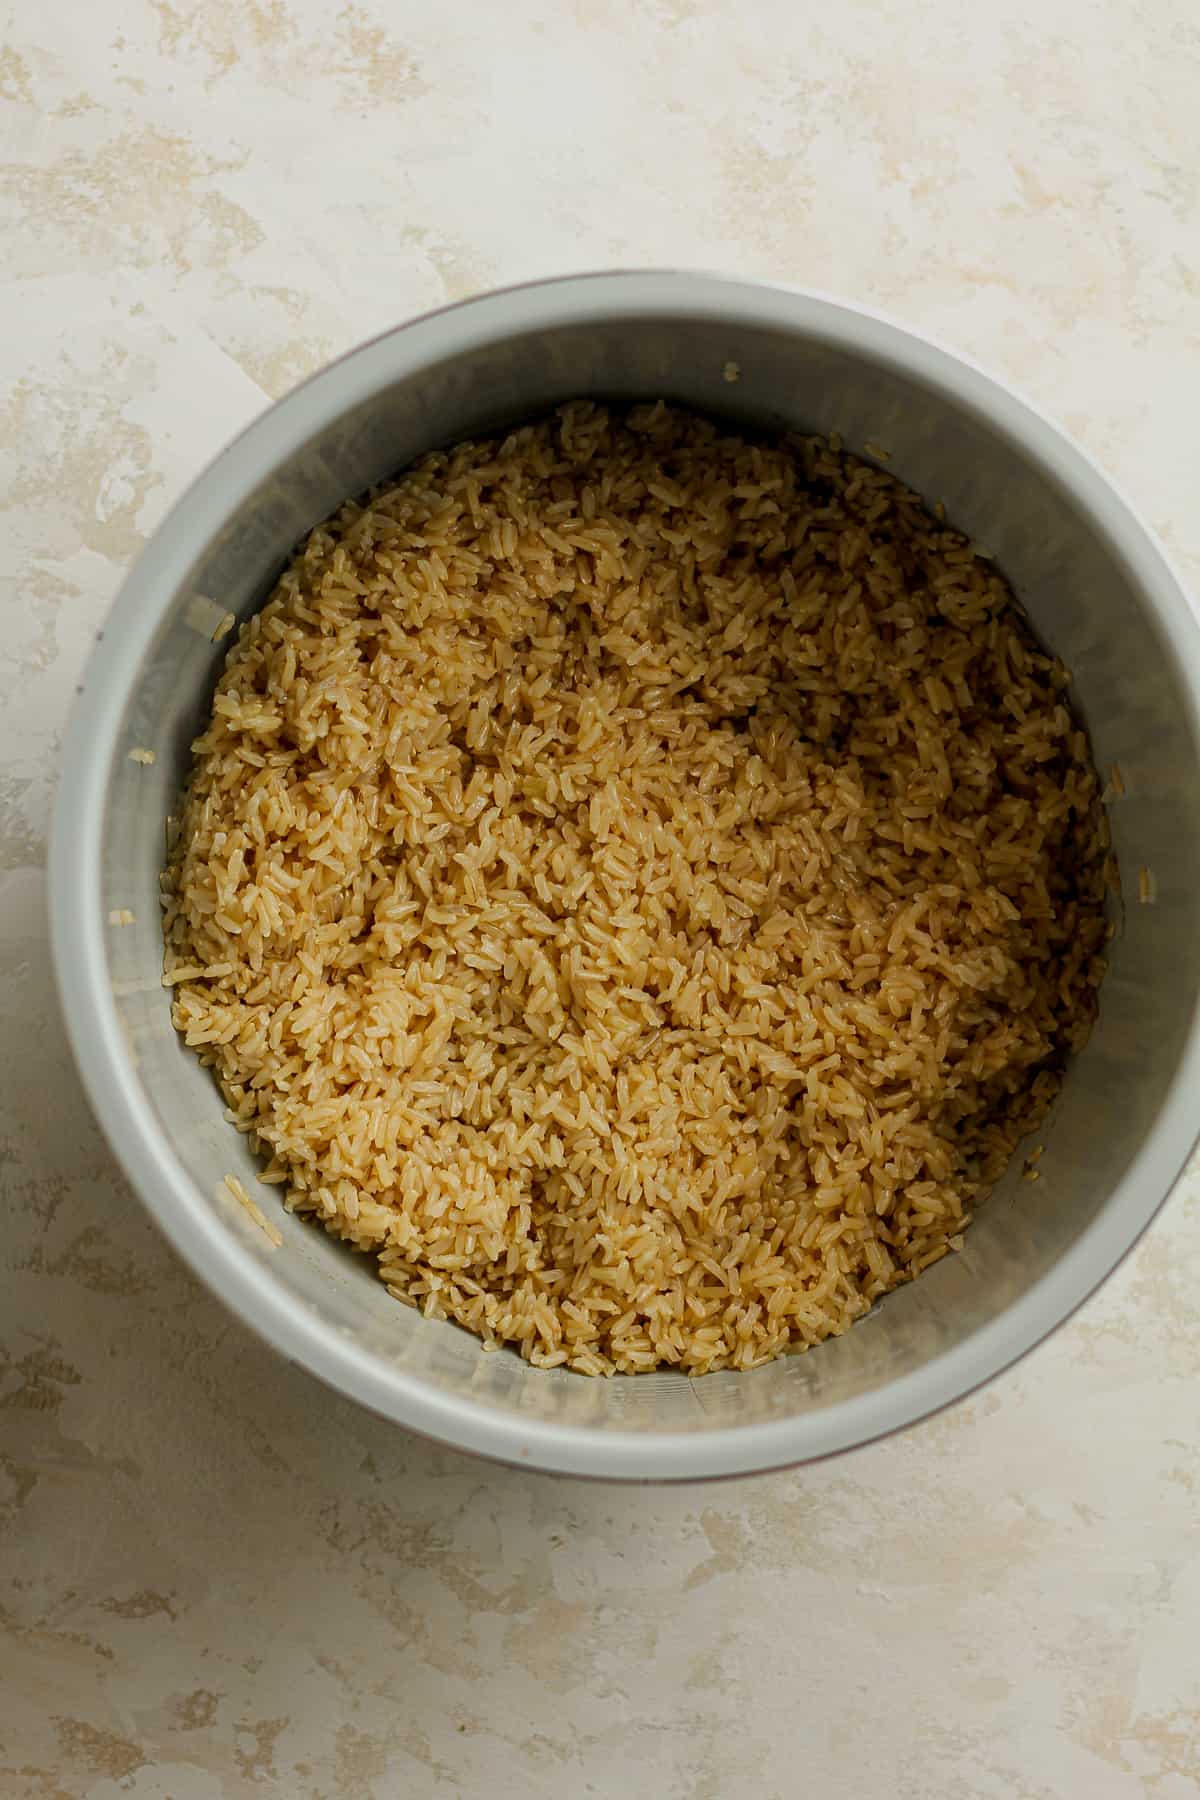 An instant pot bowl with the cooked brown rice.